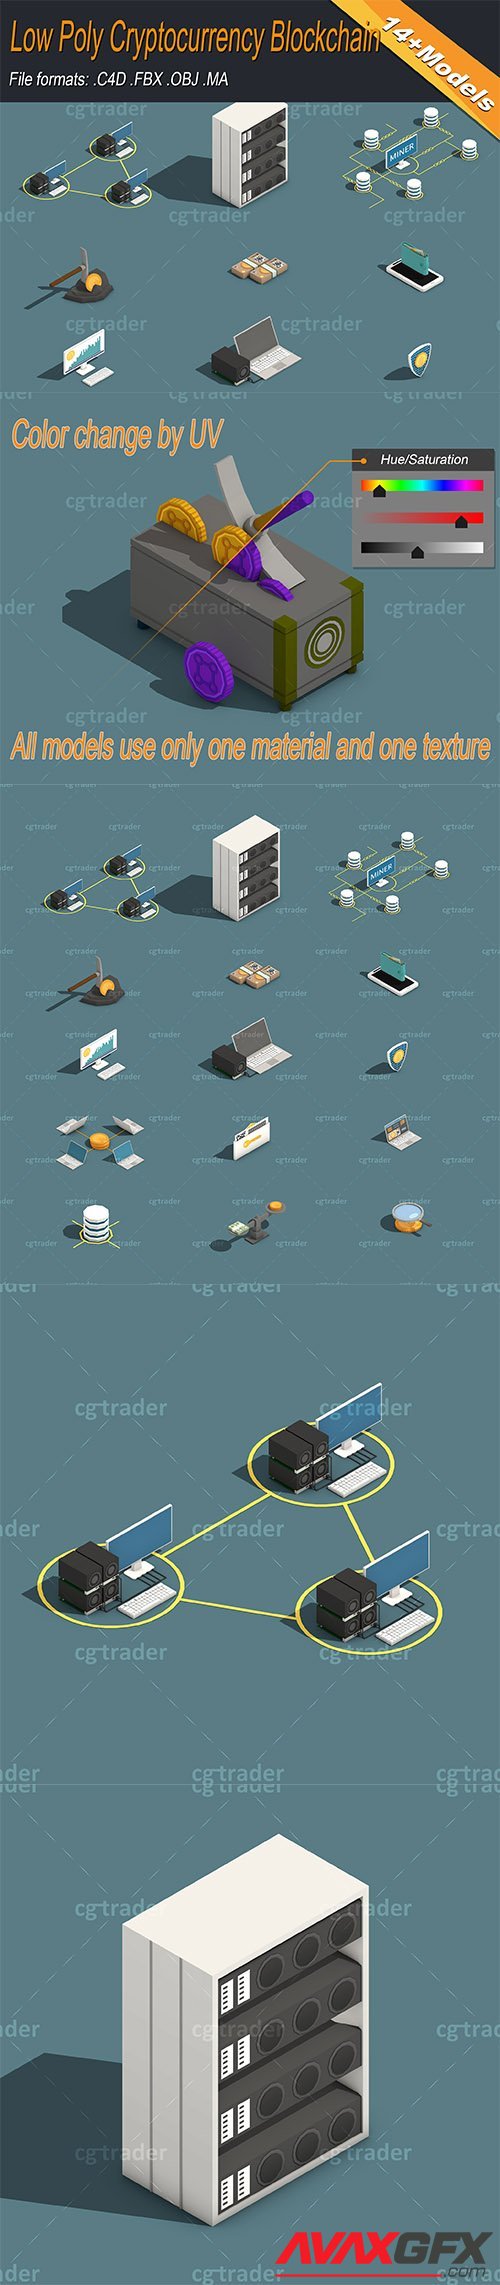 Low Poly Cryptocurrency Blockchain Pack 02 Low-poly 3D model